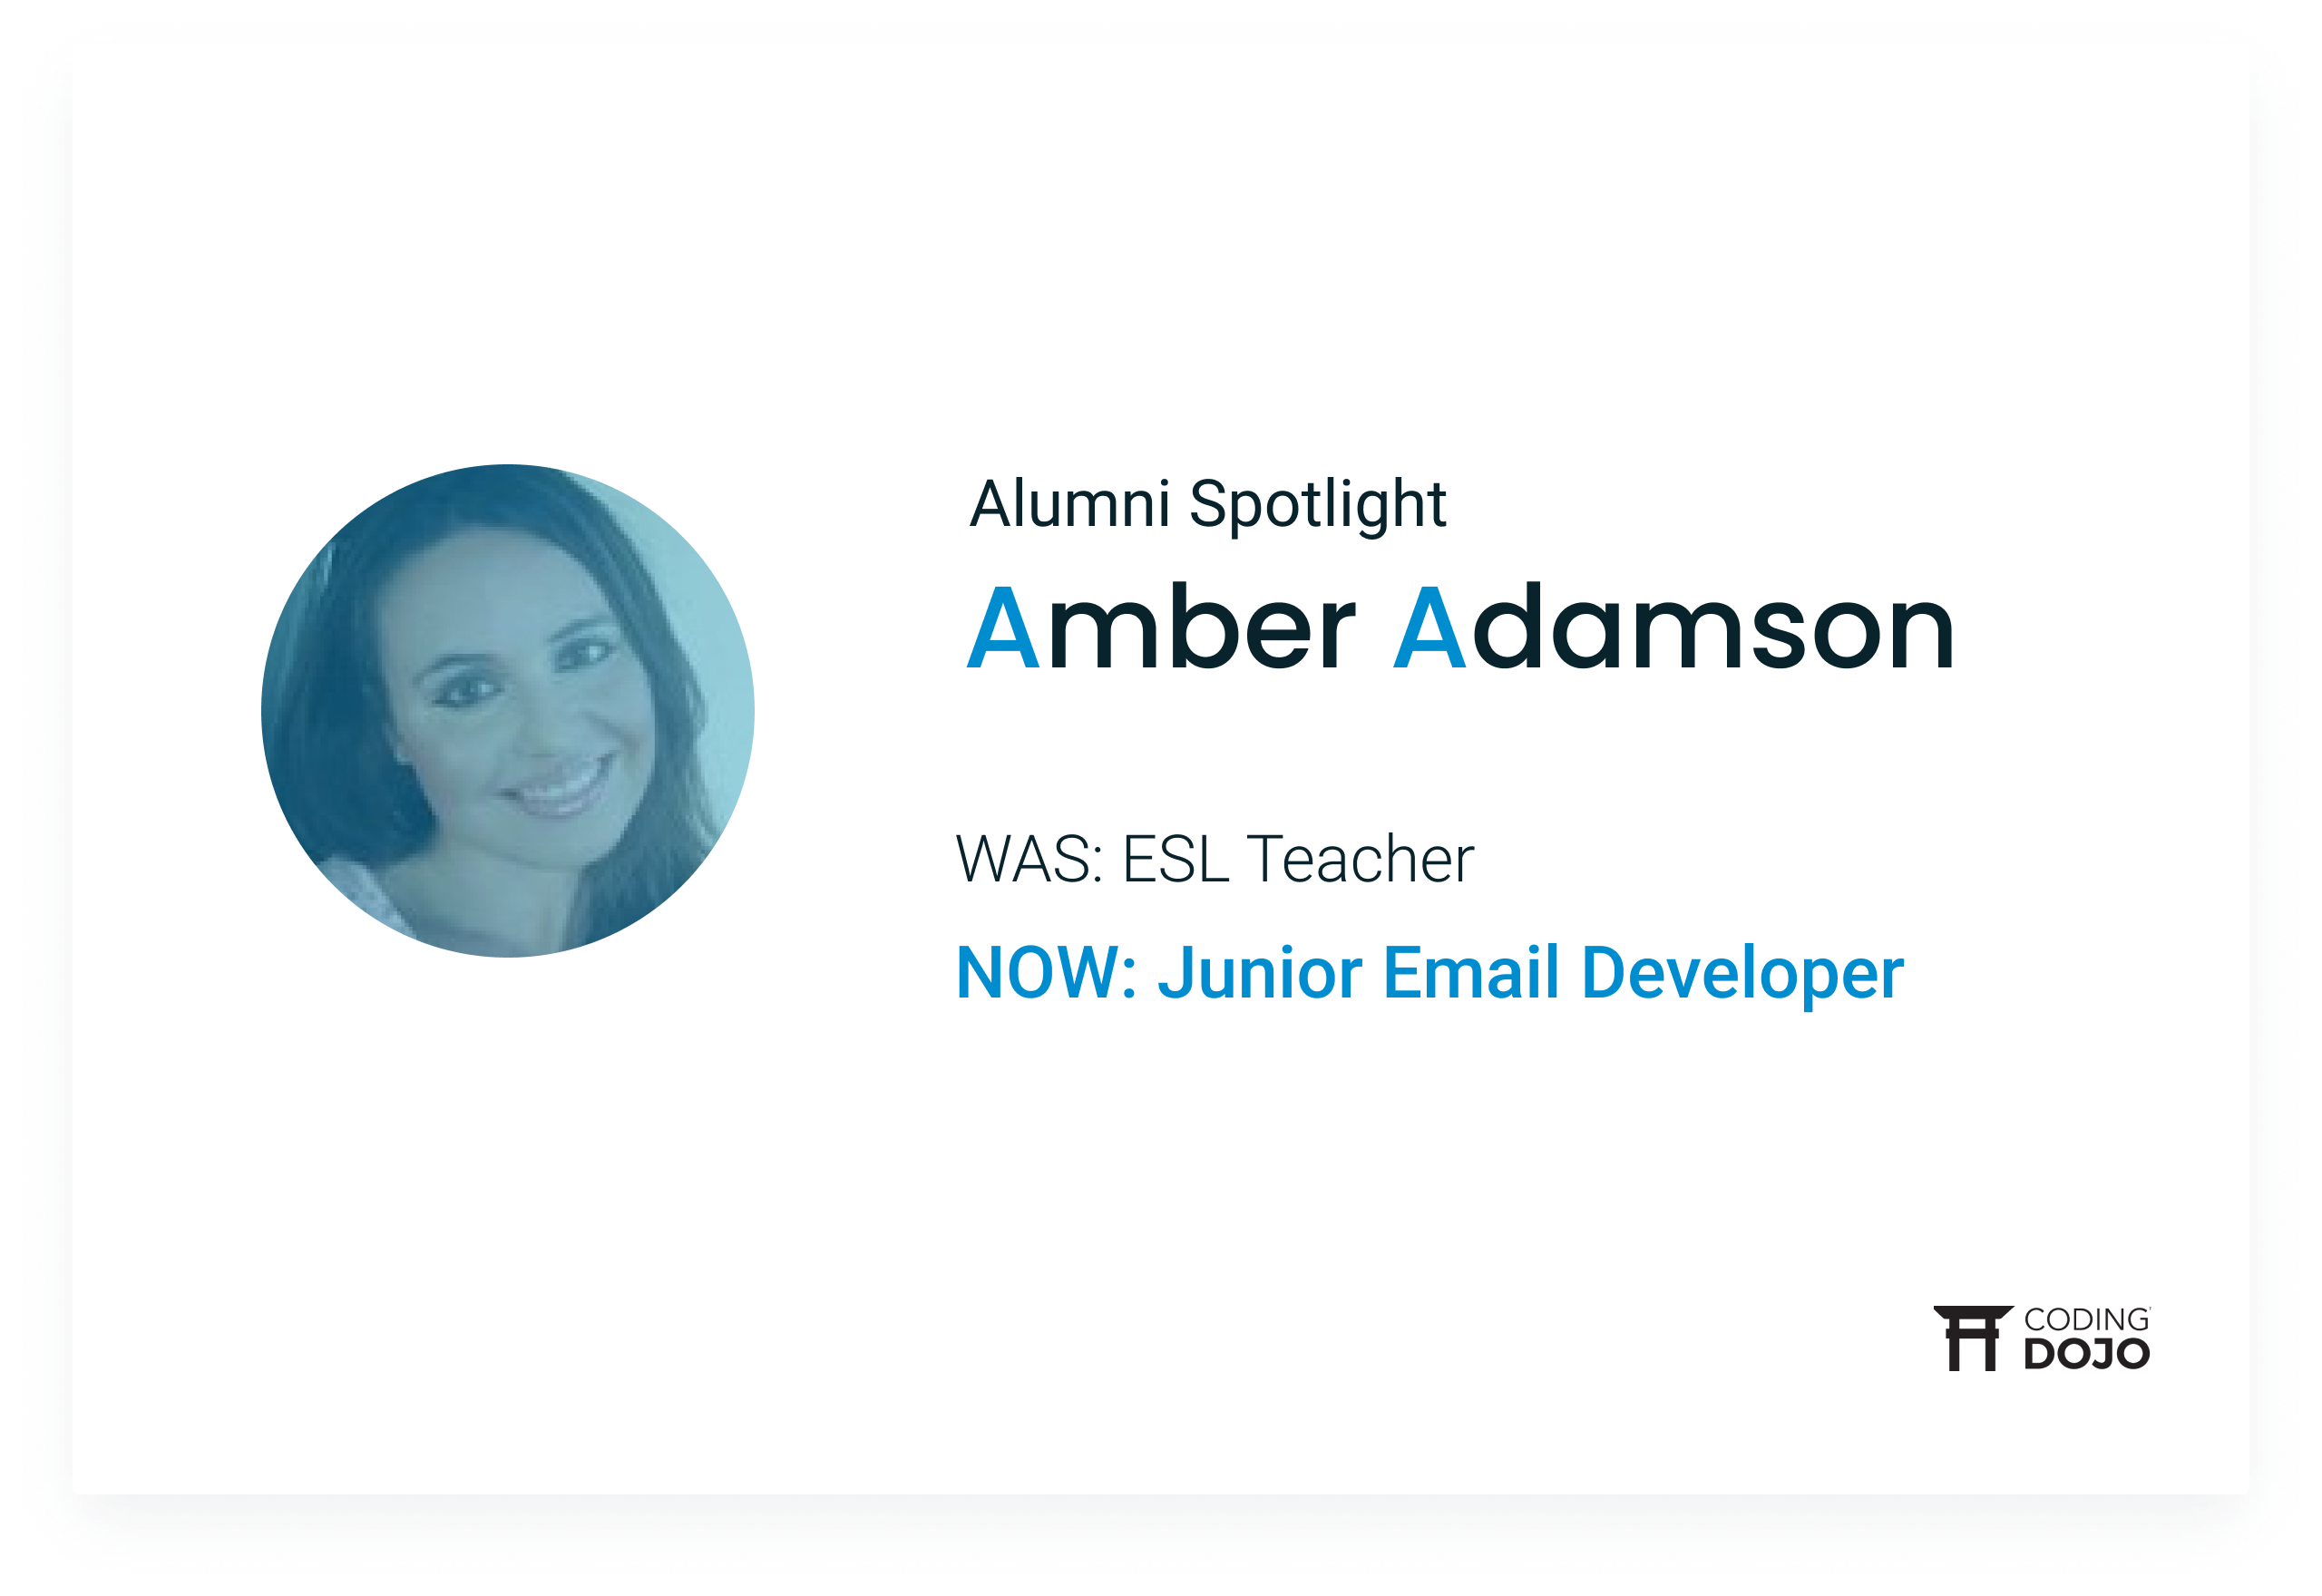 From ESL Teacher to Email Developer | How Amber Adamson Launched Her New Career